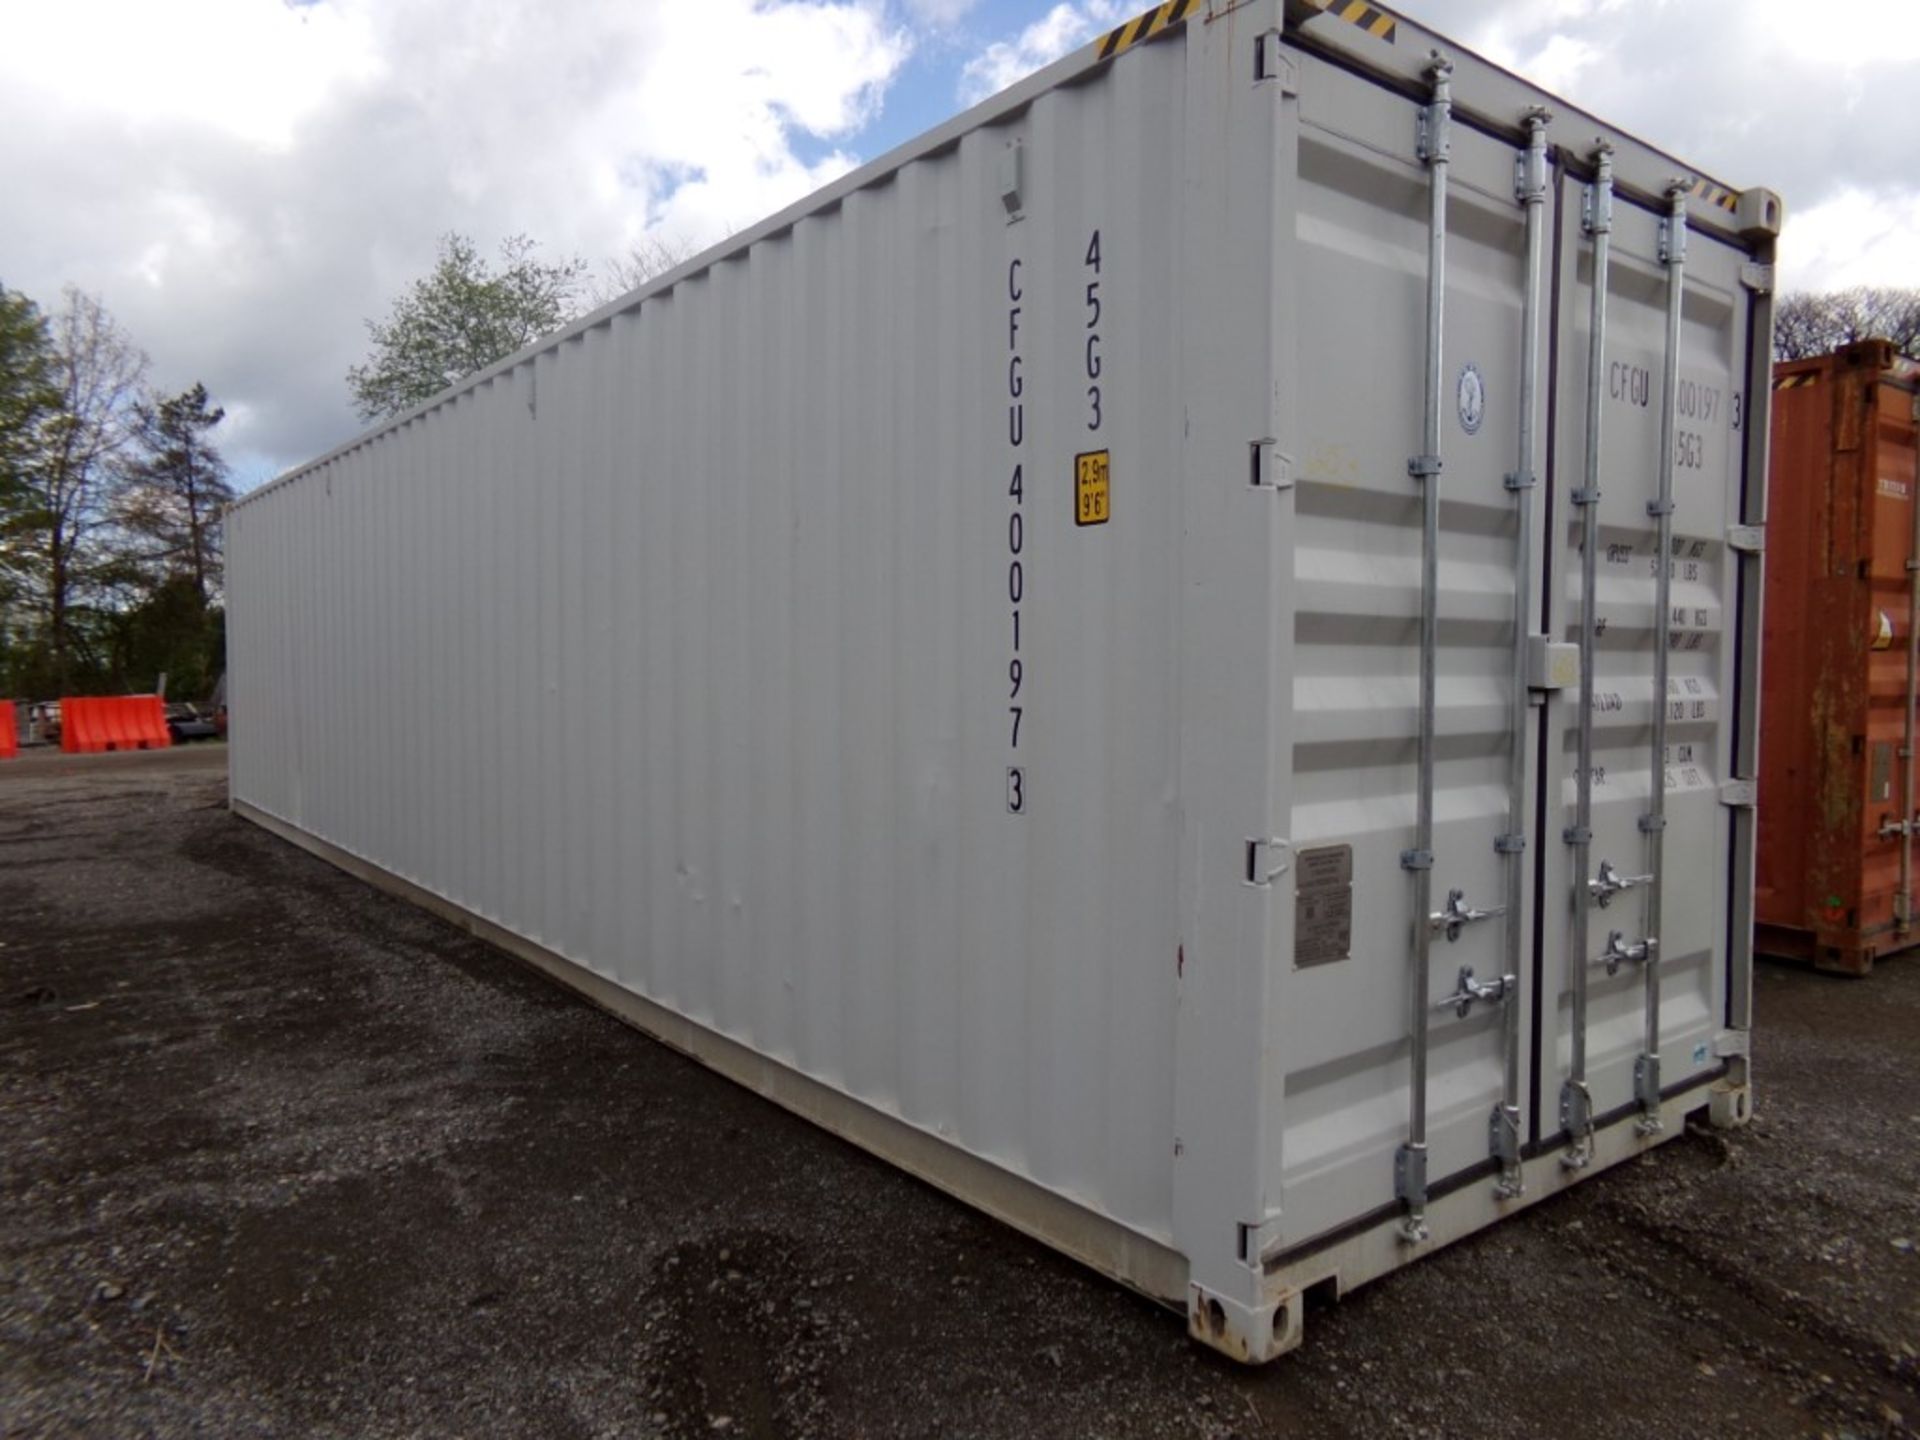 New 40' Container wirh (4) Side Access Doors and Barn Doors on 1 End, Cont. # CFGU4001973 - Image 2 of 5